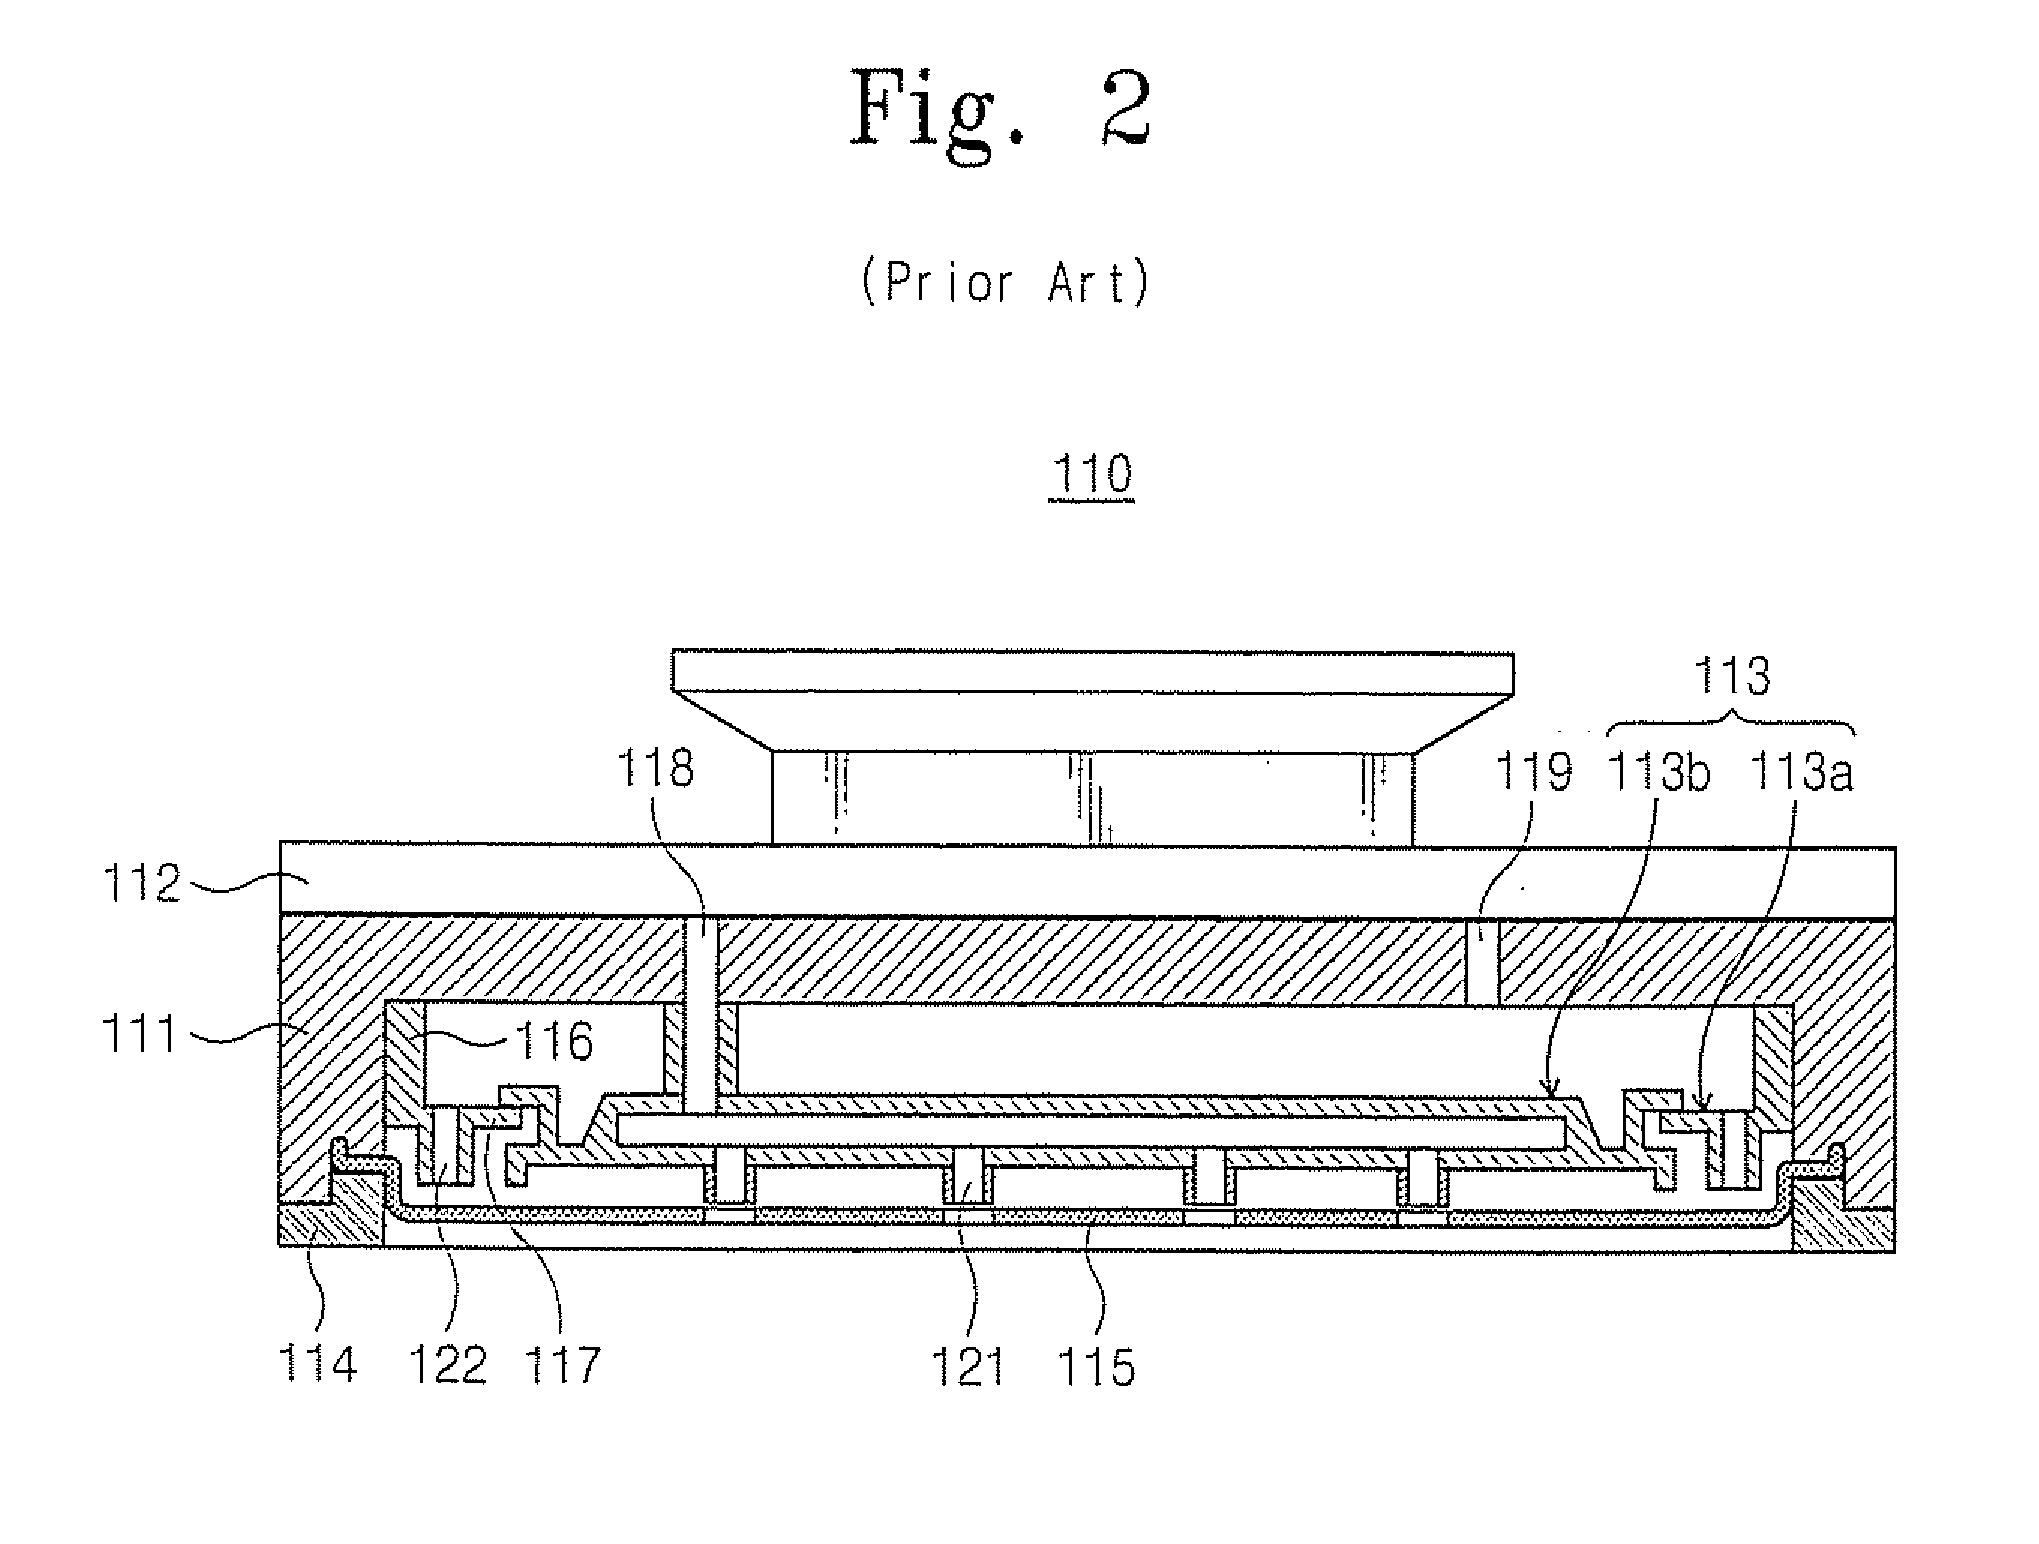 Chemical Mechanical Polishing Apparatus and Methods Using a Polishing Surface with Non-Uniform Rigidity